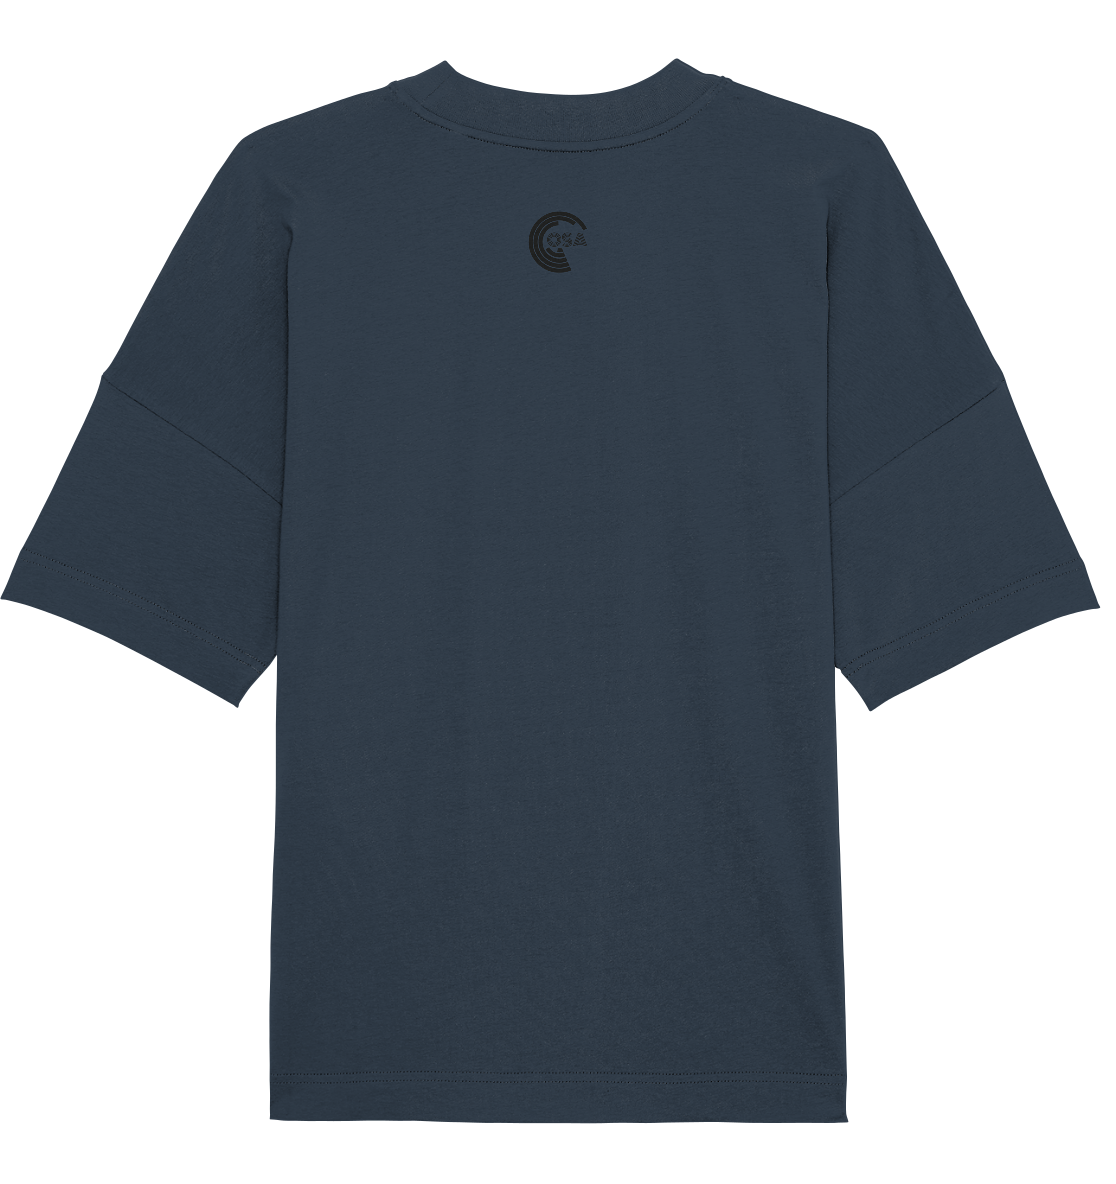 OSA - T shirt oversize "Grow in harmony with your body" - Organic Oversize Shirt